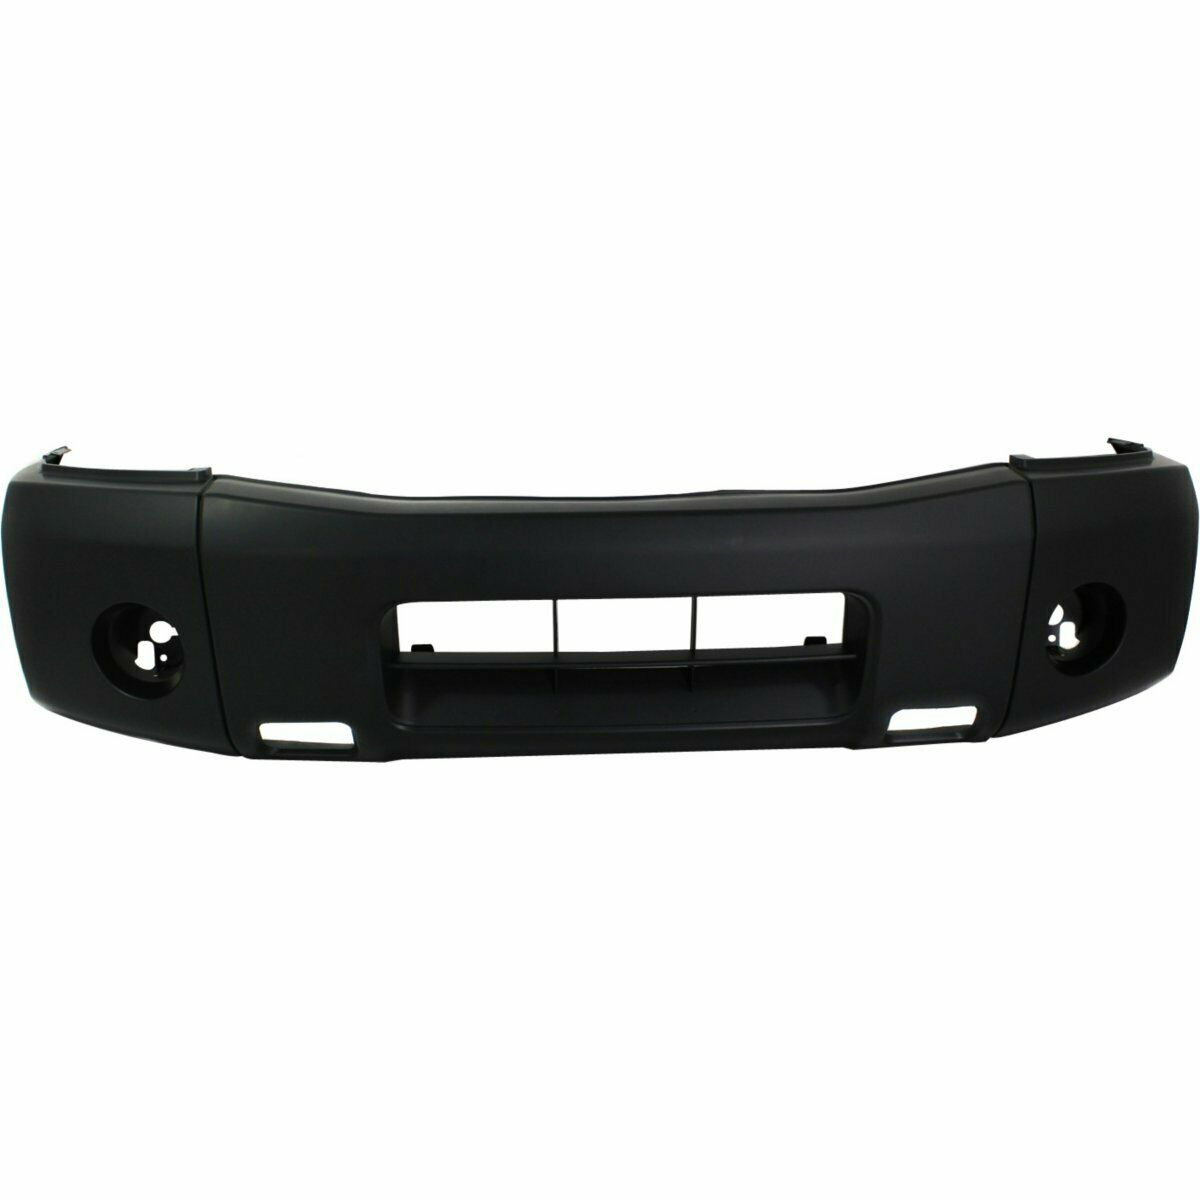 2009-2014 Nissan Titan Front Bumper Painted to Match